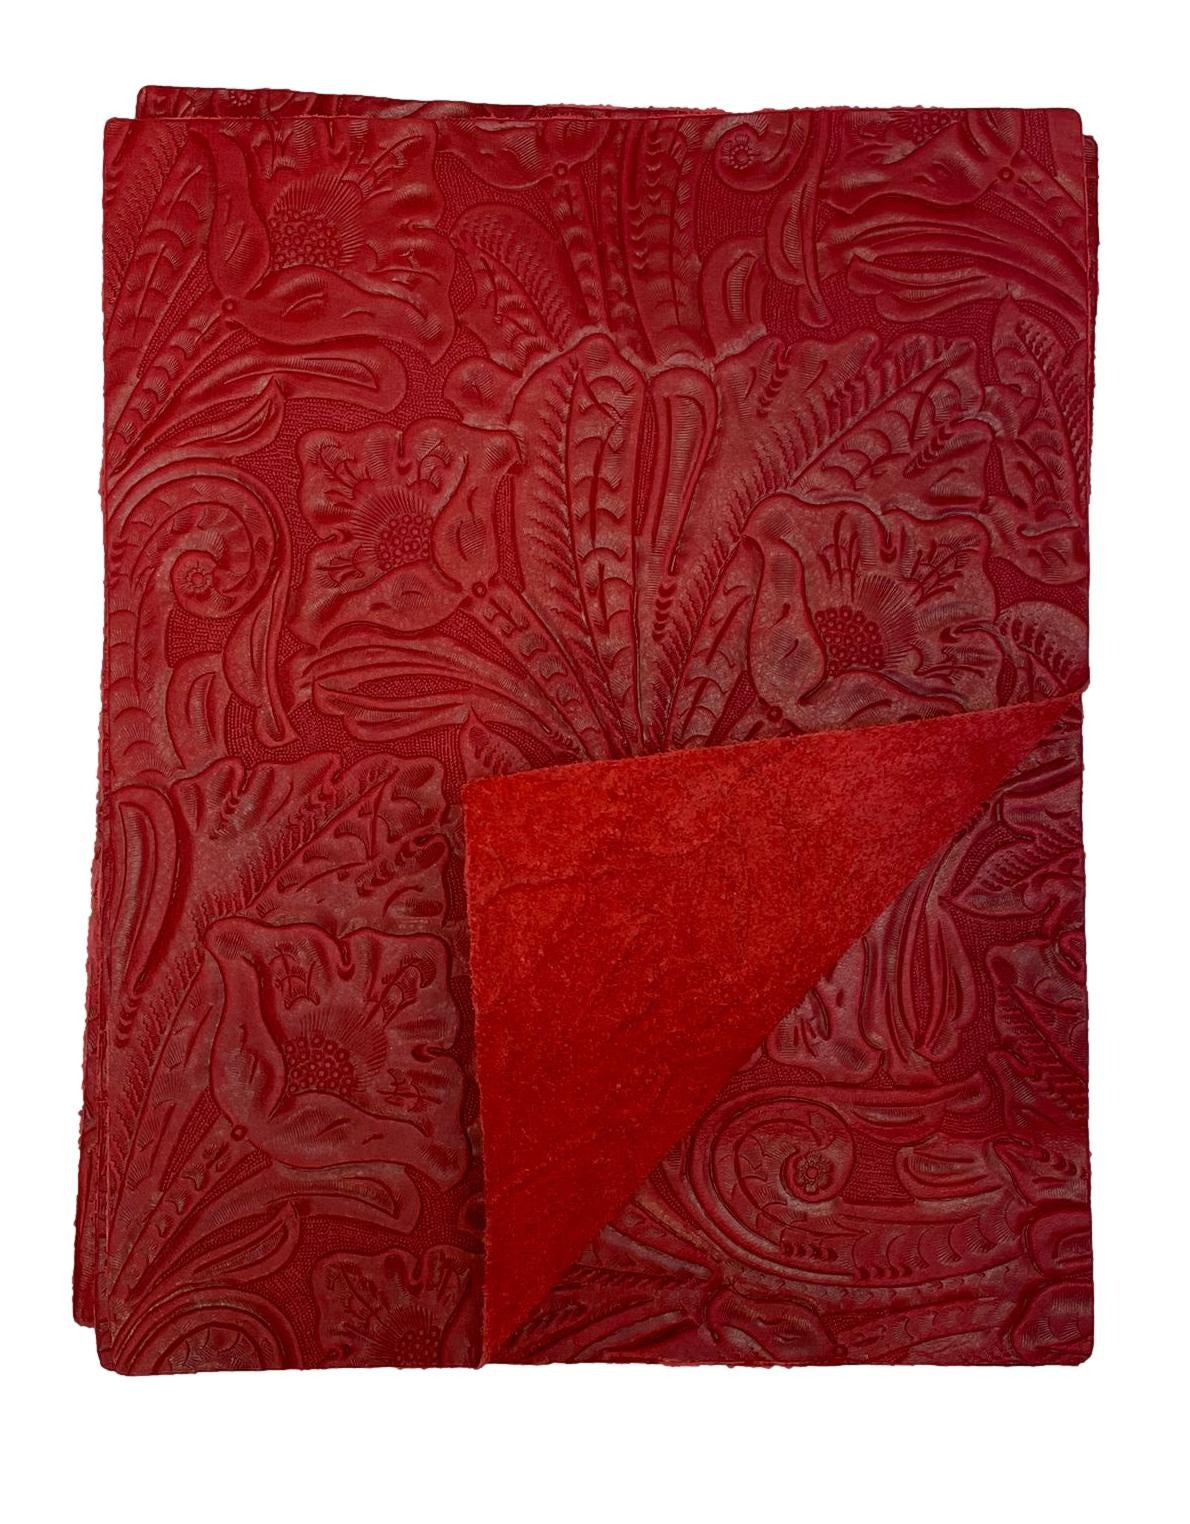 Special Offering - Red Large Floral Embossed Cowhide Leather: 8.5" x 11" Pre-Cut Pieces